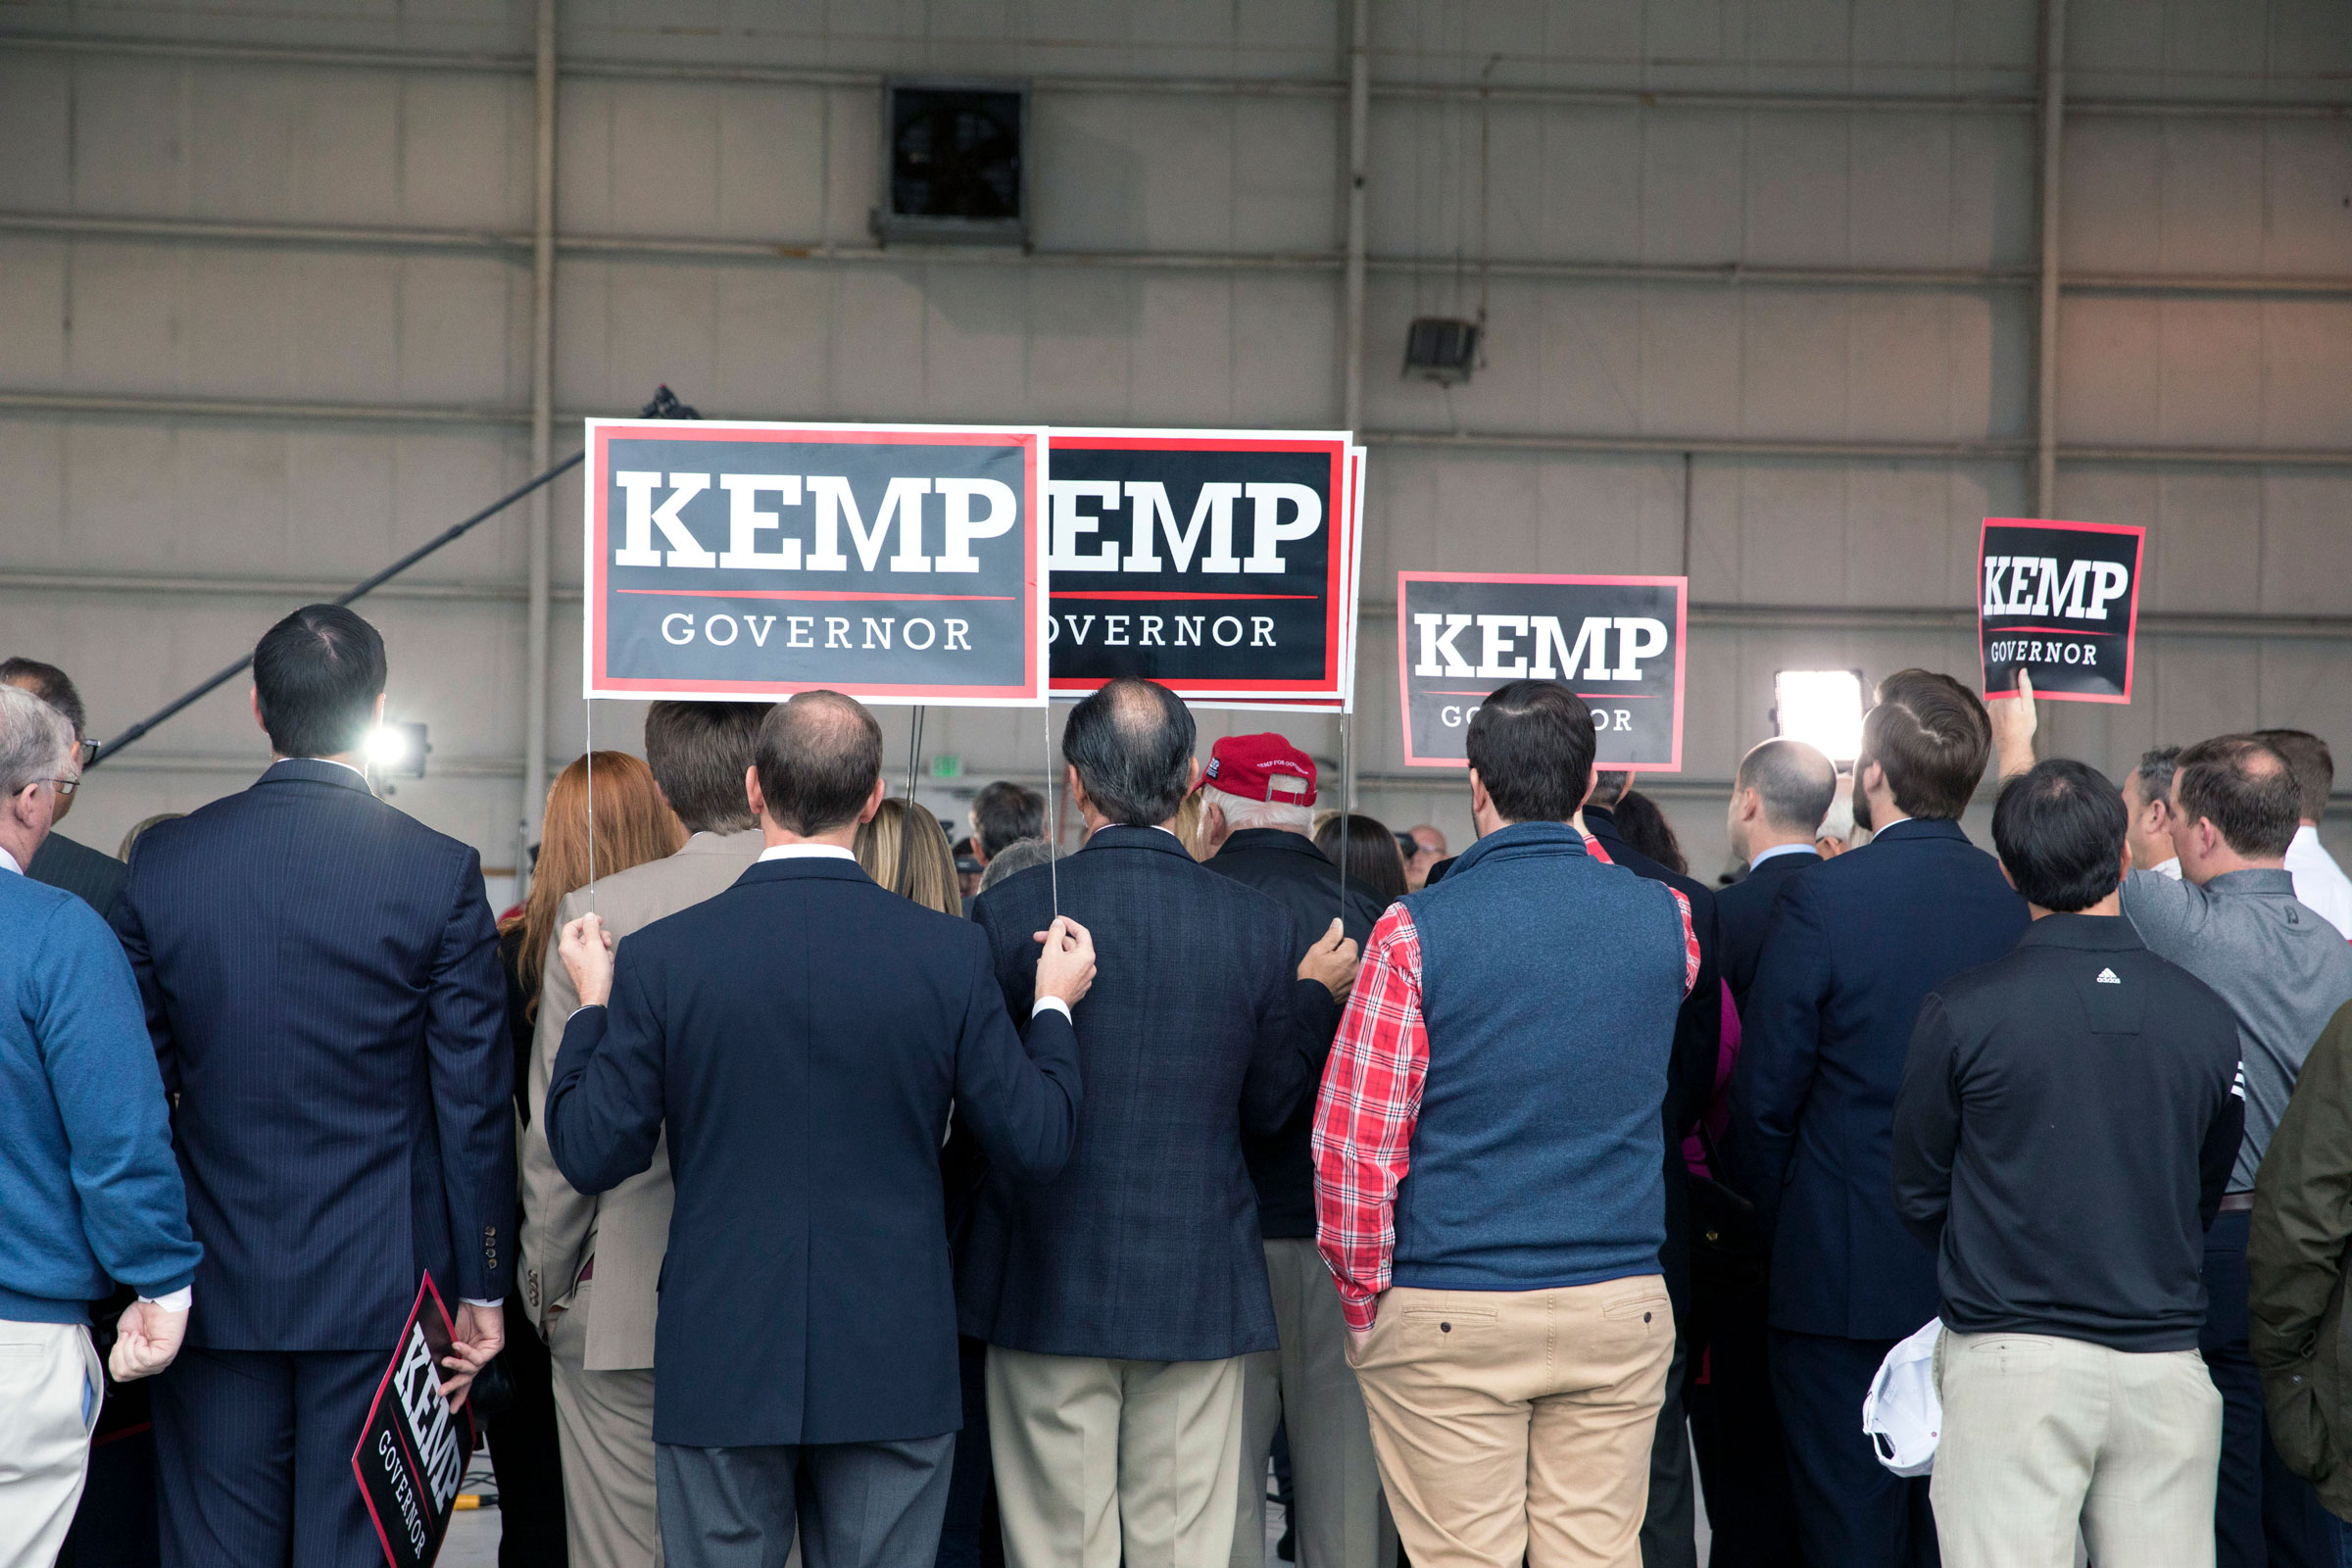 Supporters gather at a campaign rally for Brian Kemp, the Georgia secretary of state and Republican candidate for governor, at the DeKalb-Peachtree Airport in Chamblee, Ga., on Monday morning, Nov. 5, 2018.